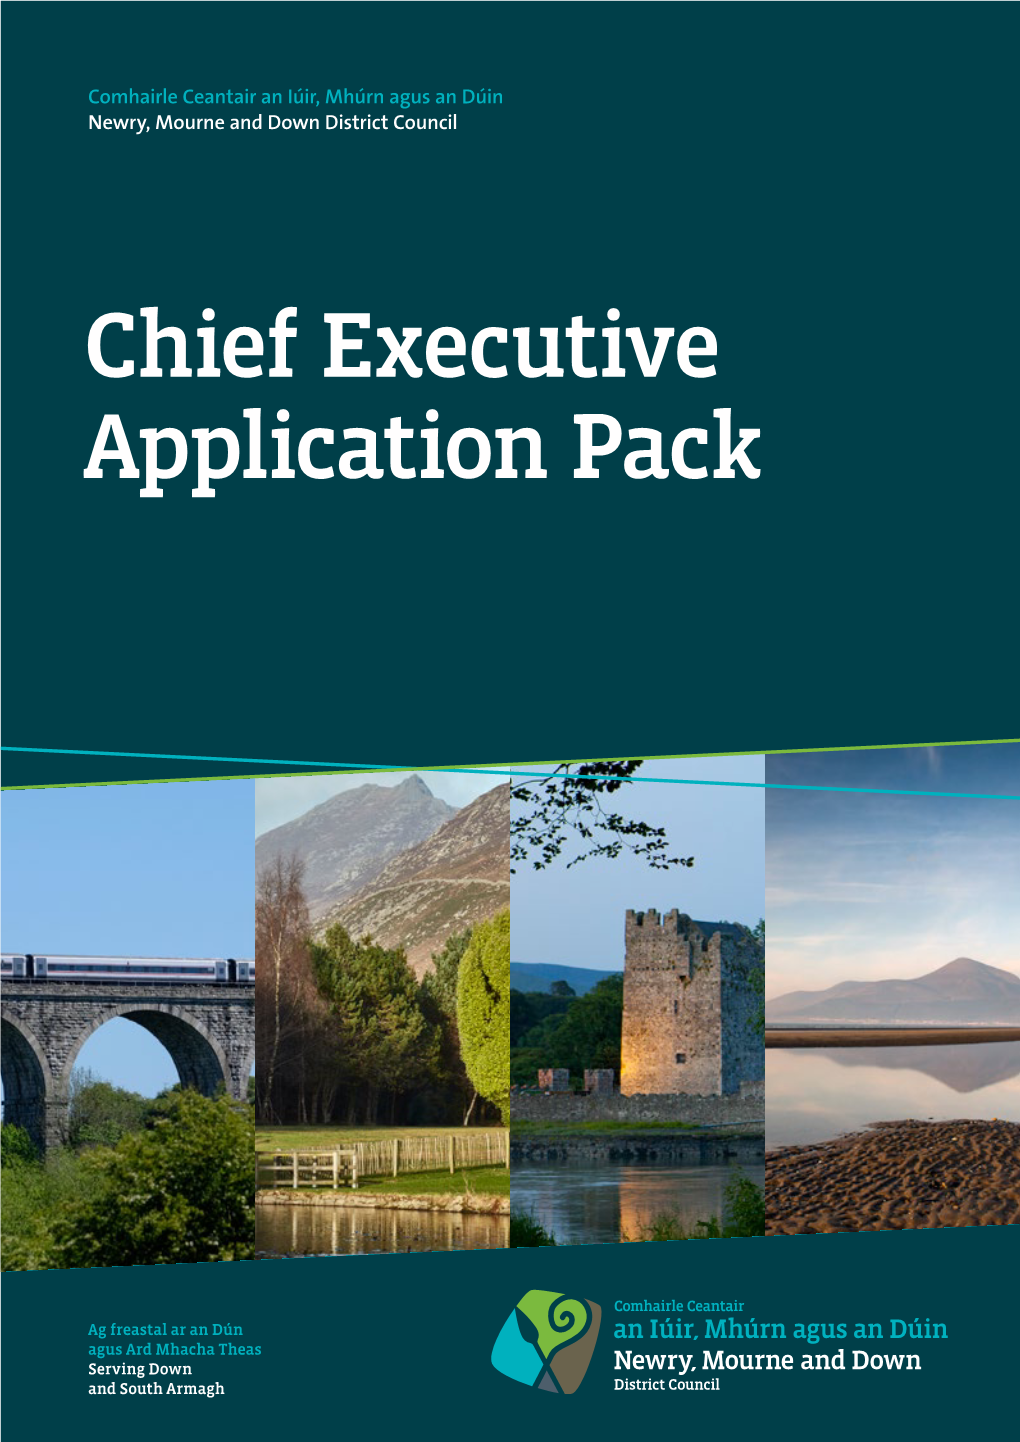 Chief Executive Application Pack | Newry, Mourne and Down District